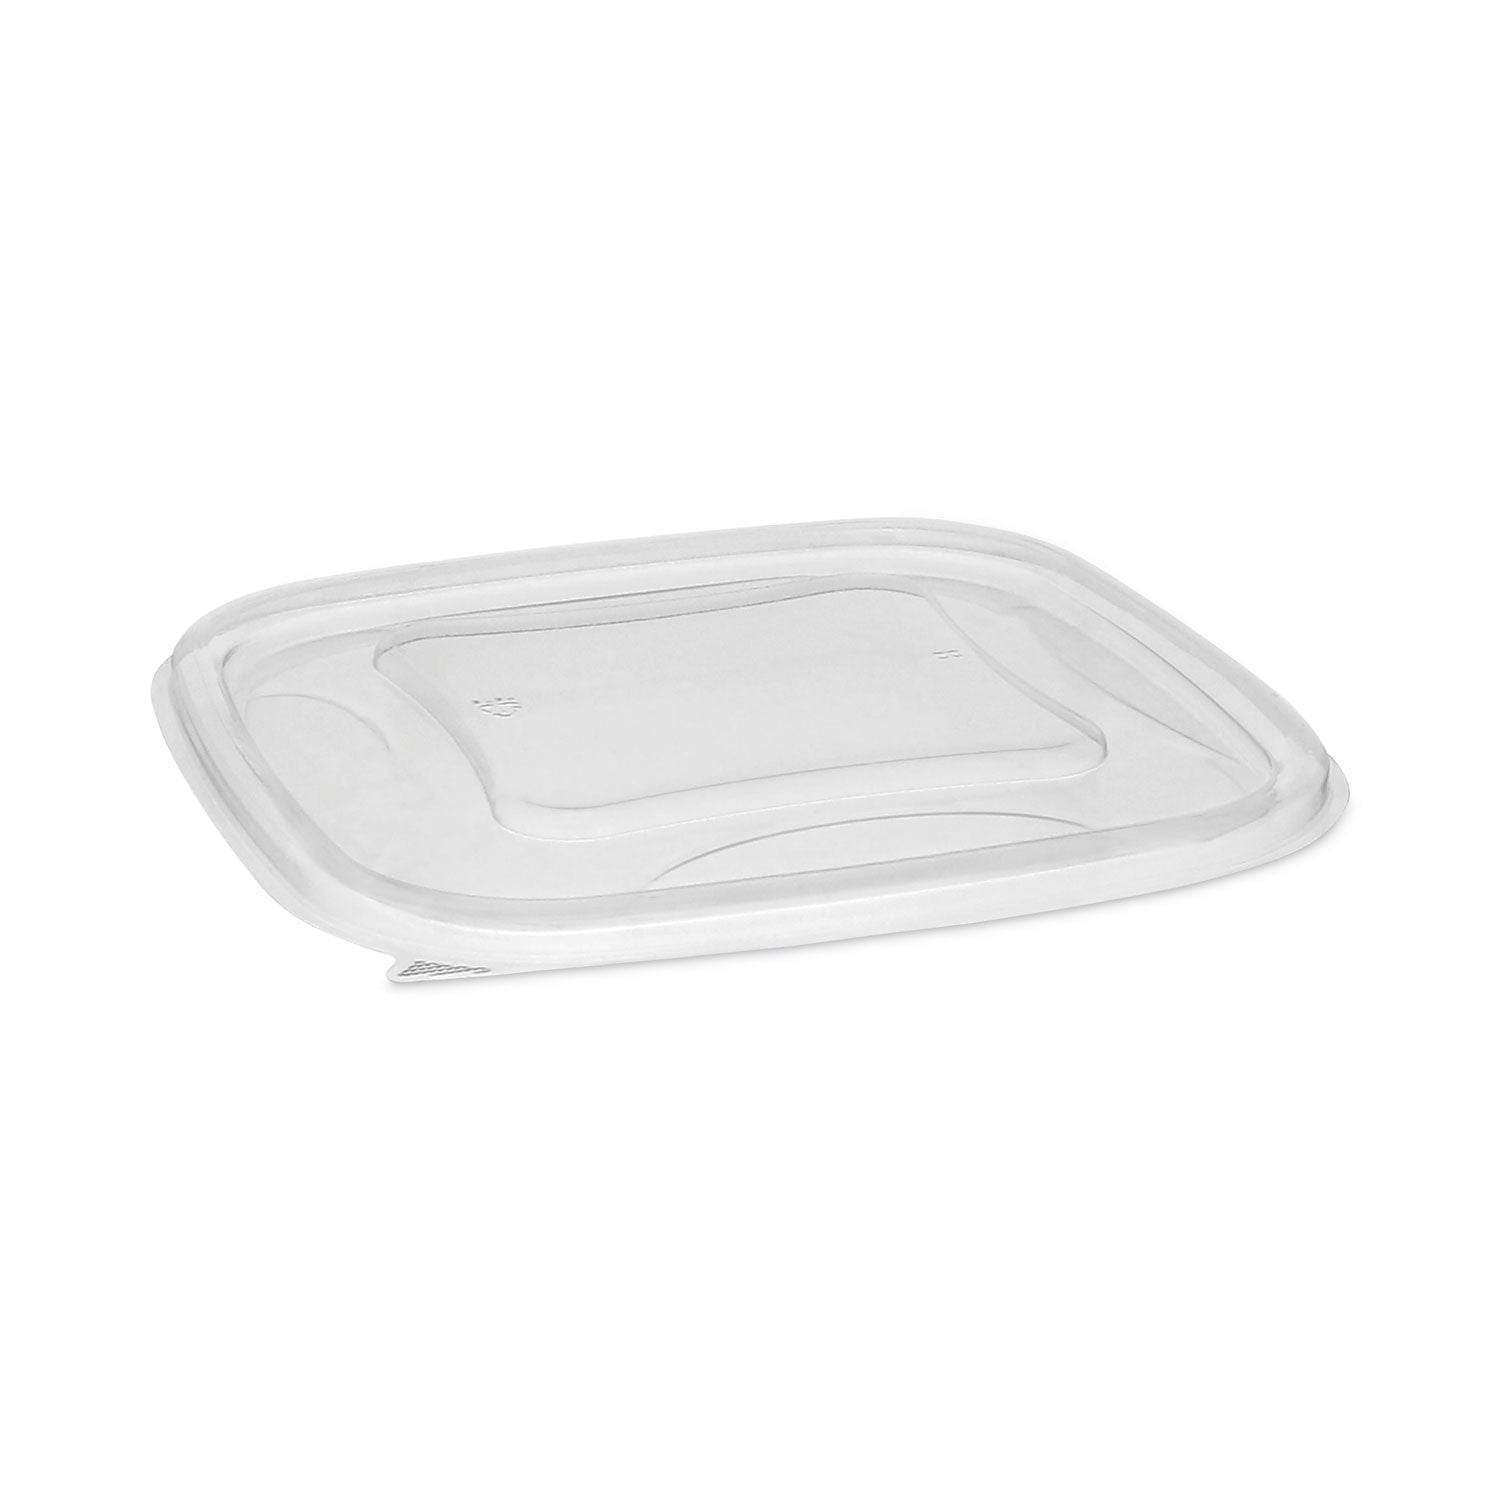 earthchoice-square-recycled-bowl-flat-lid-738-x-738-x-026-clear-plastic-300-carton_pctsaclf07 - 1